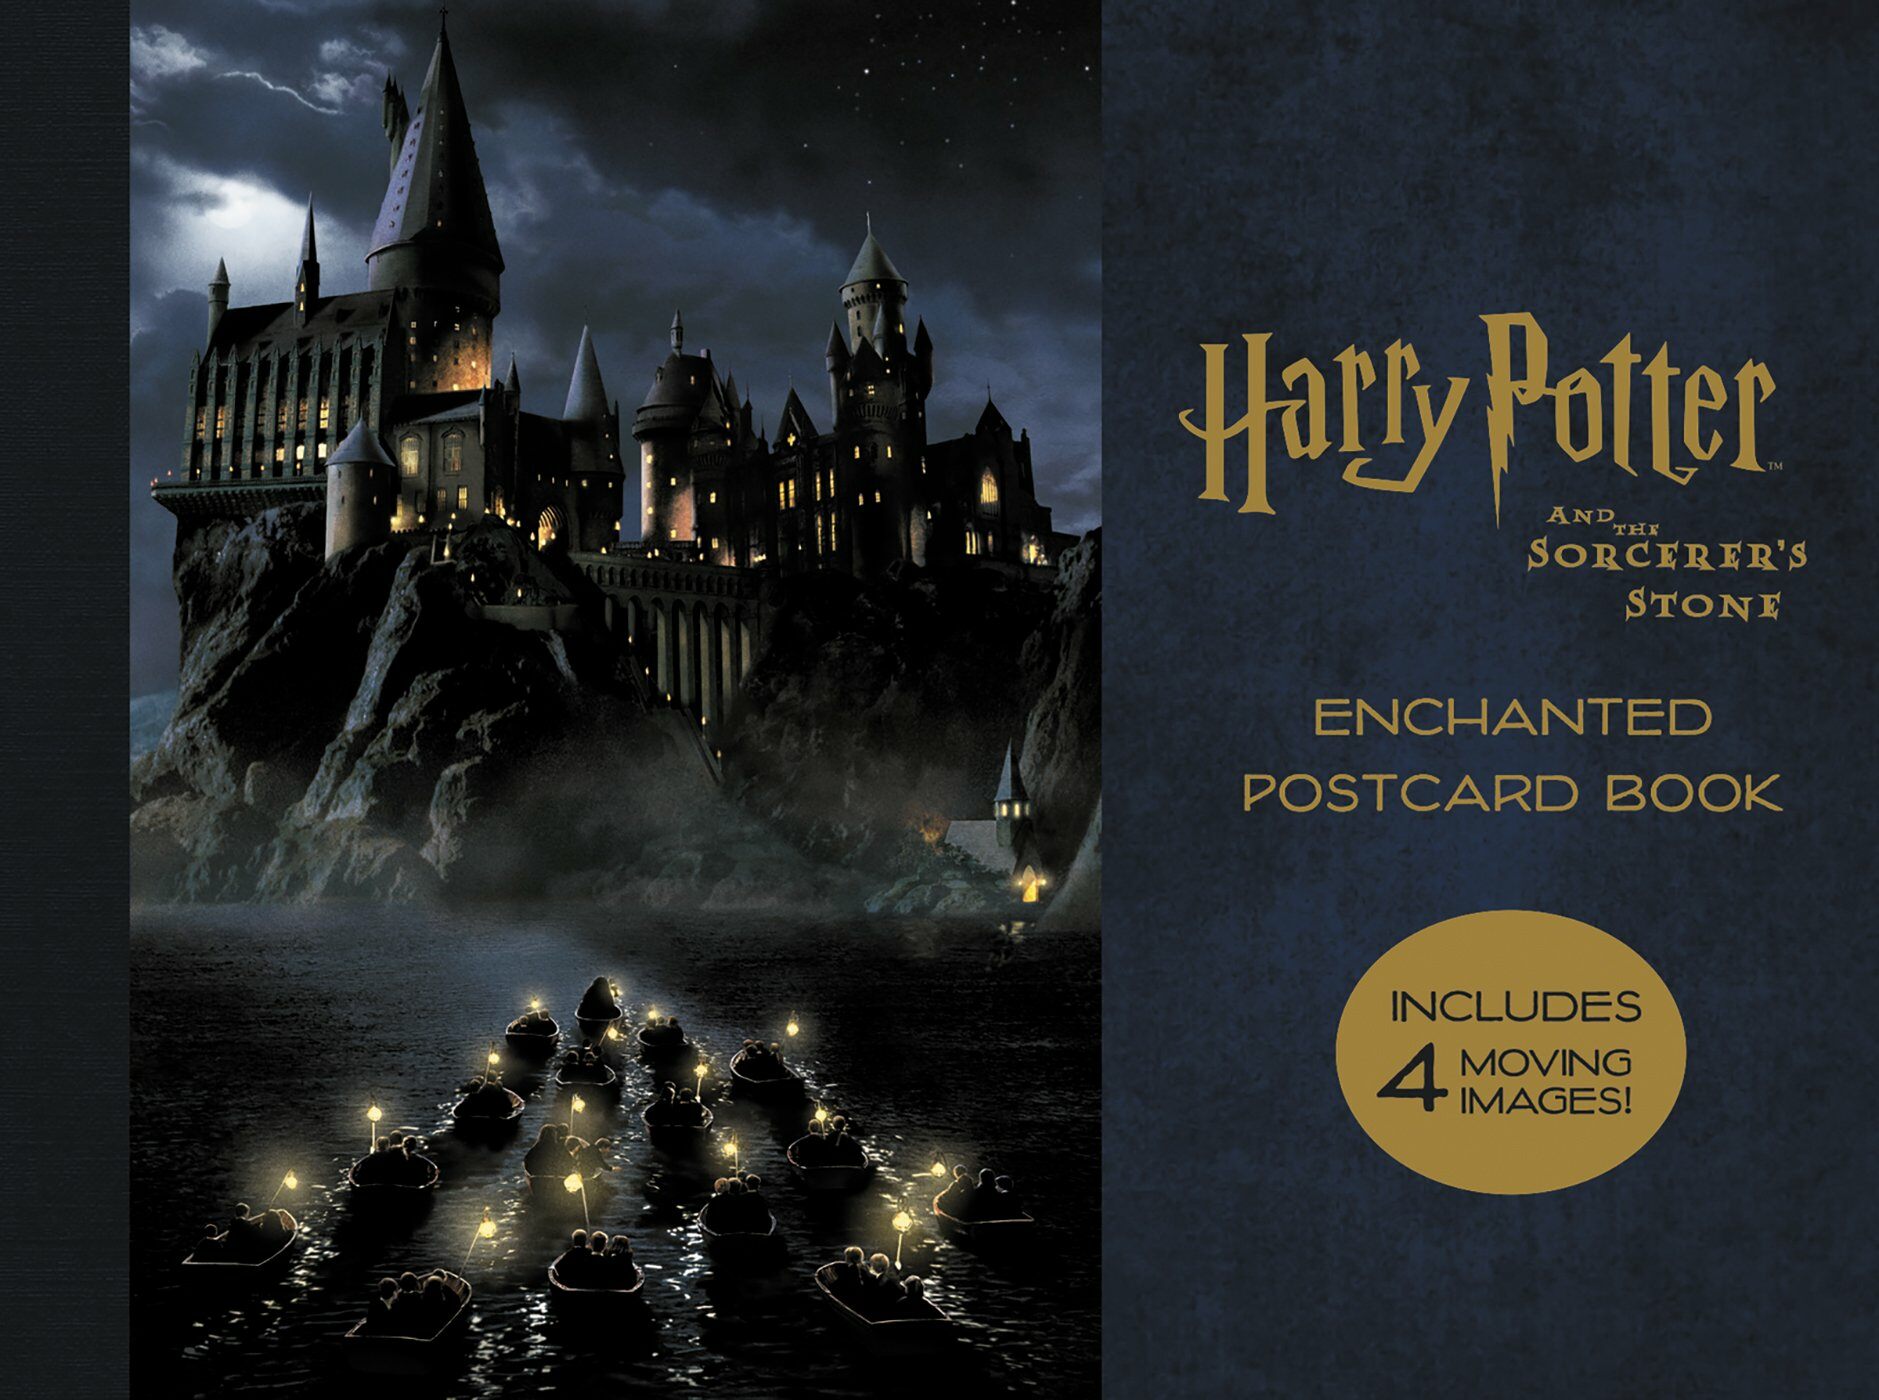 Harry Potter and the Sorcerers Stone Enchanted Postcard Book (Novelty)